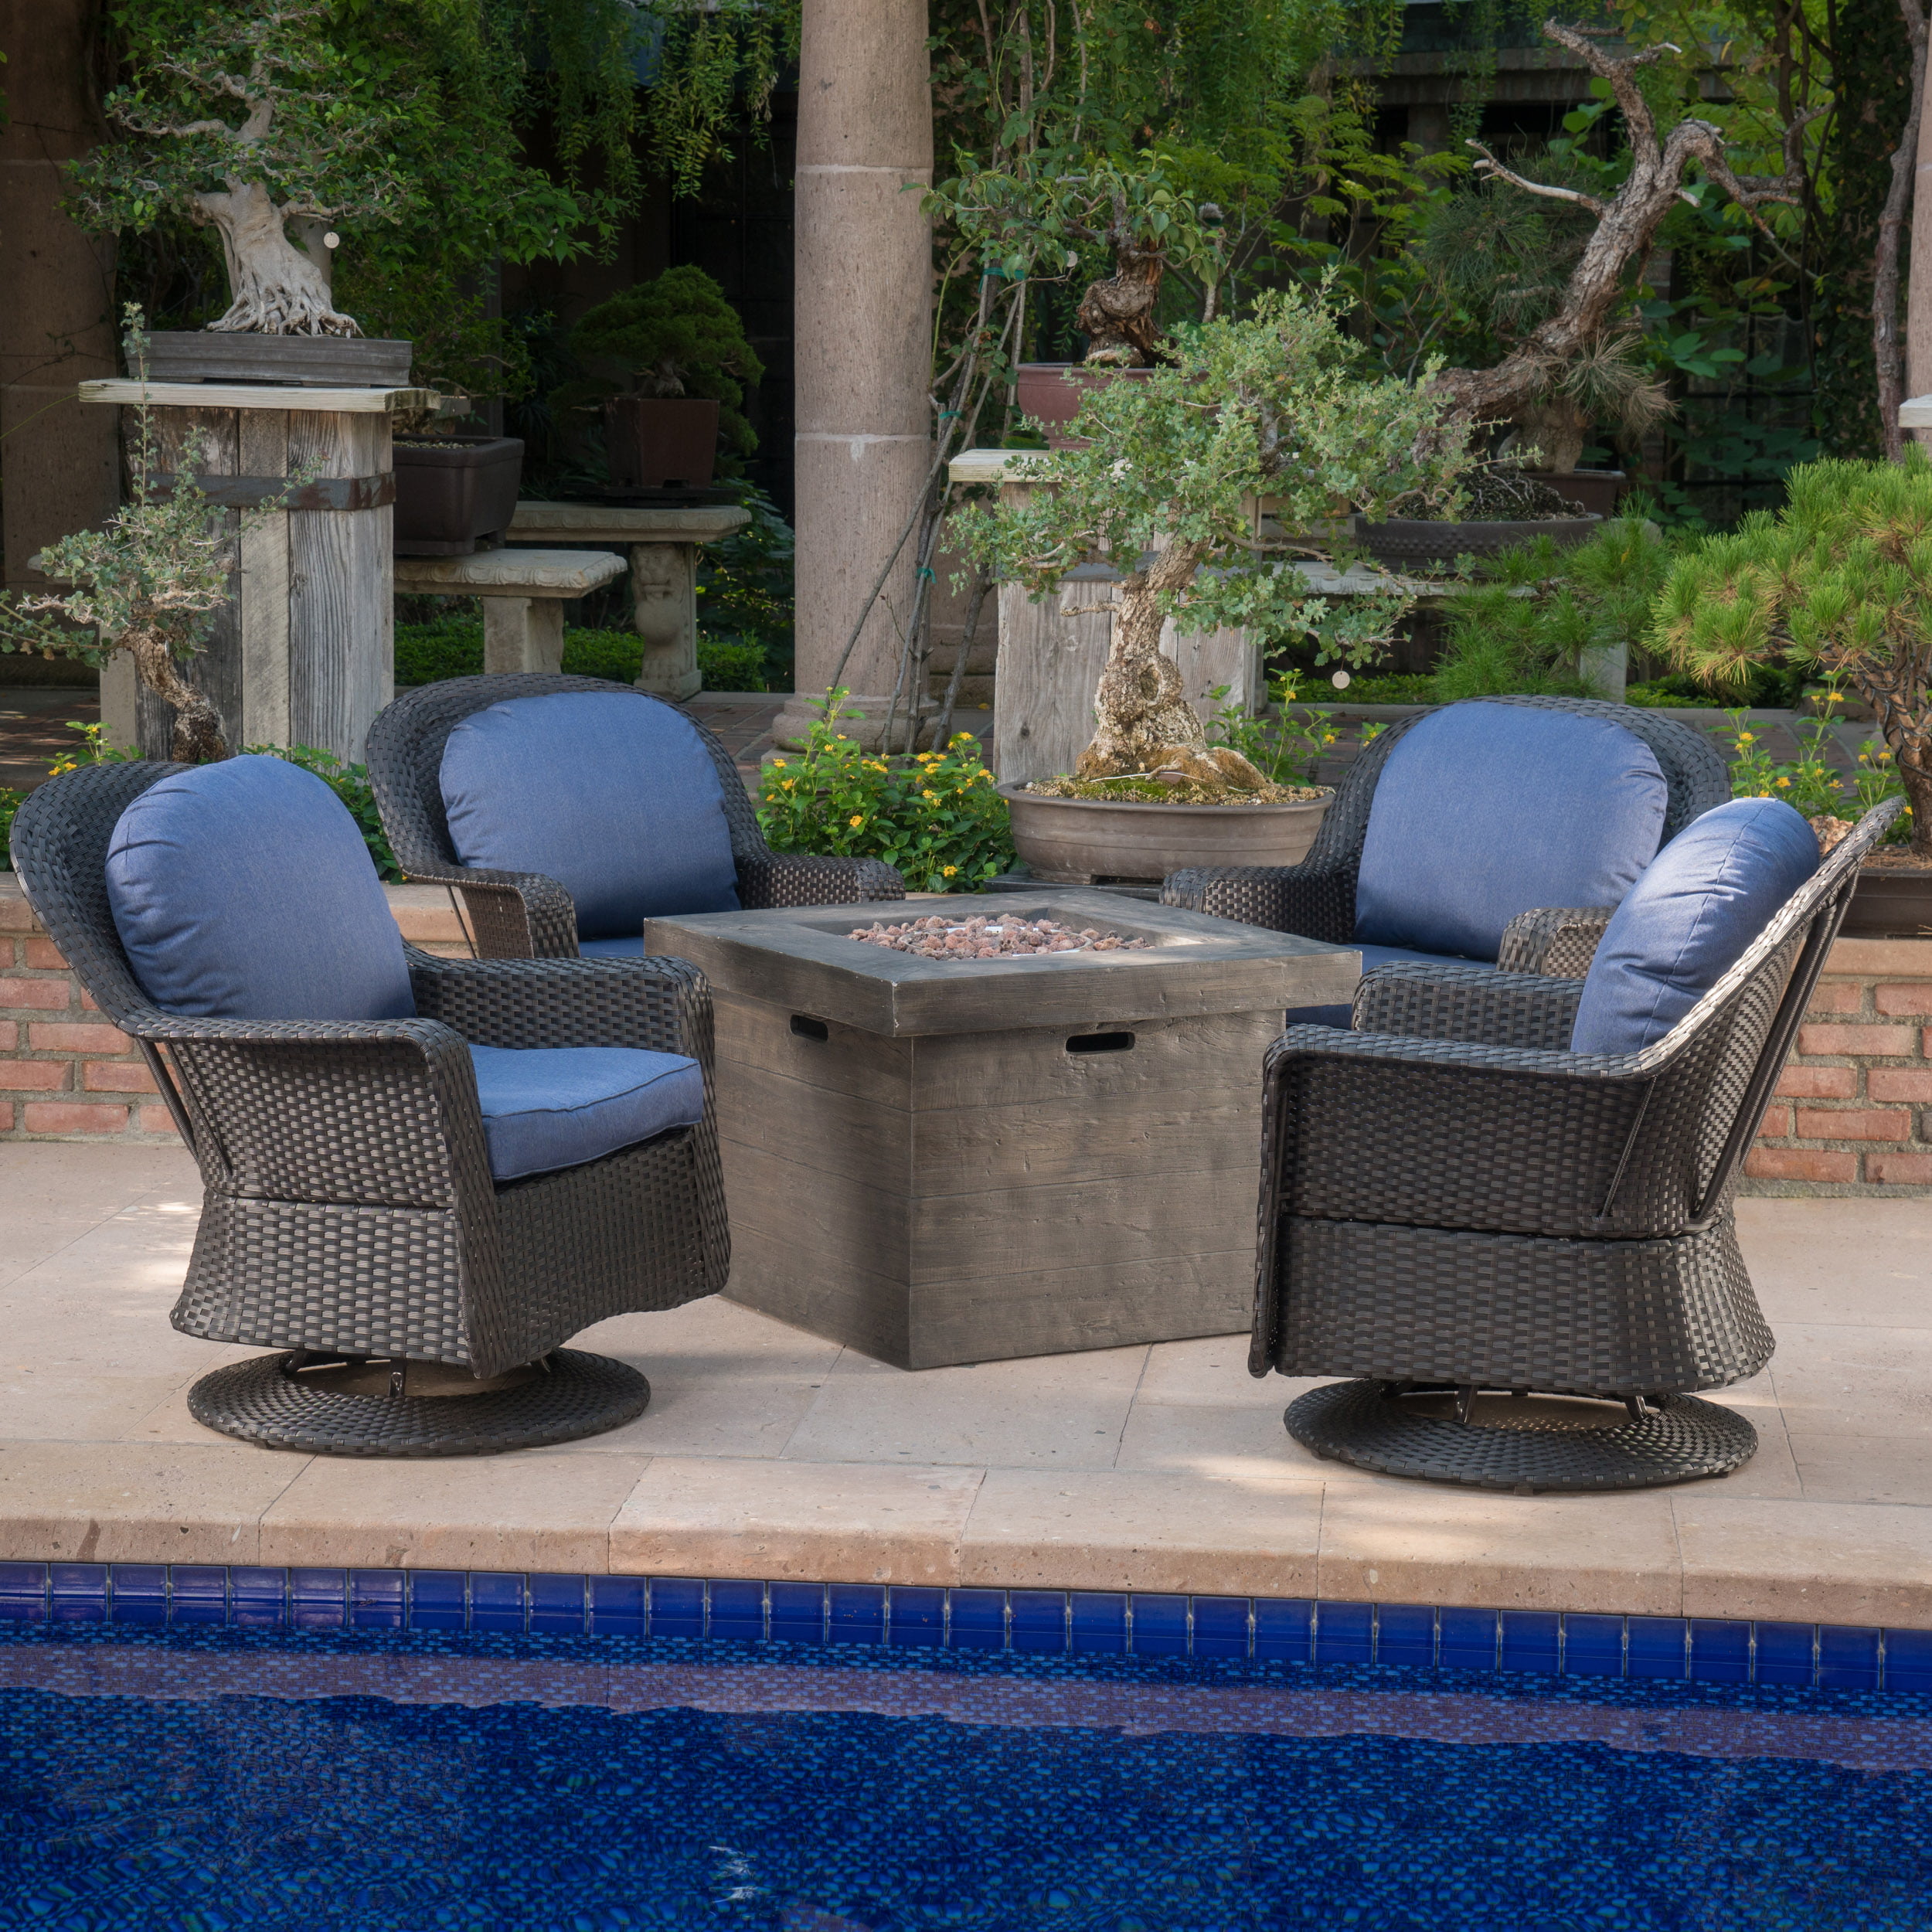 Outdoor 5 Piece Wicker Swivel Club Chairs and Cushions with Gas Burning